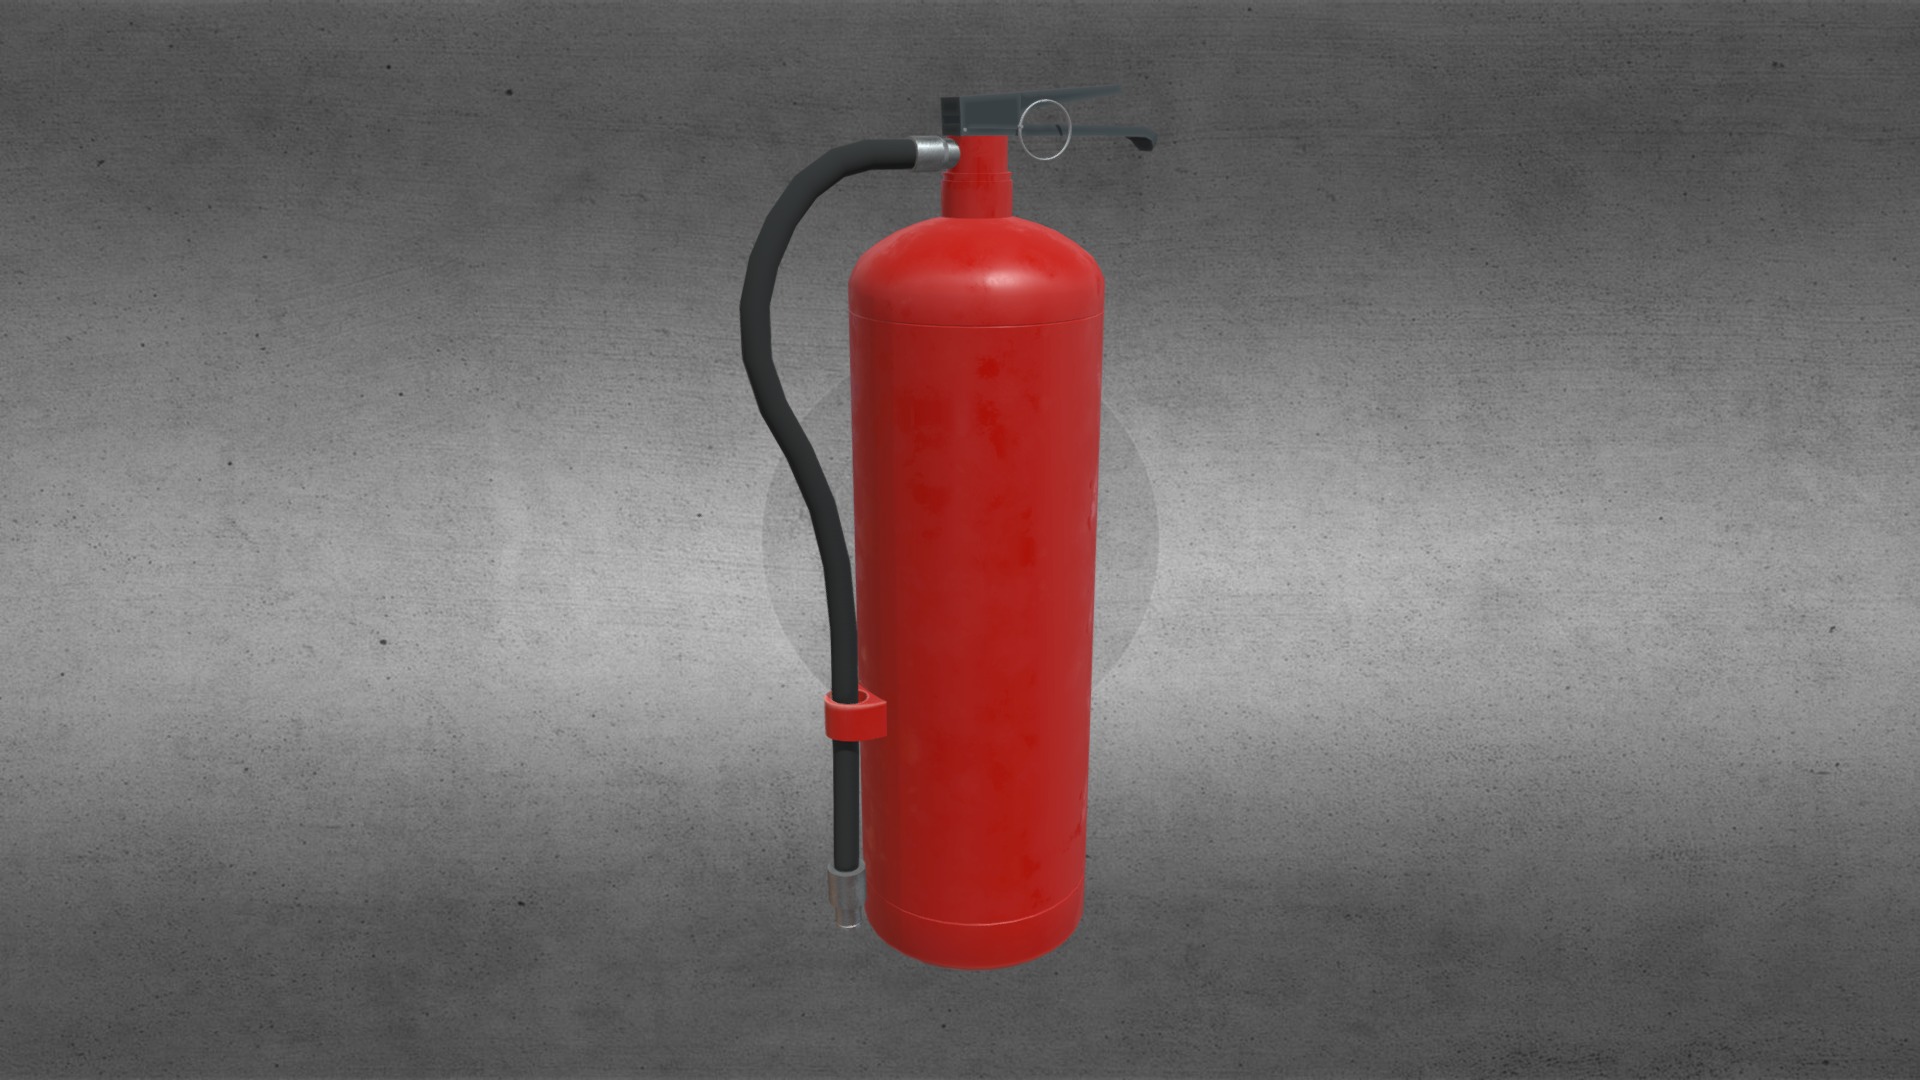 3D model extinguisher - This is a 3D model of the extinguisher. The 3D model is about a red fire hydrant.